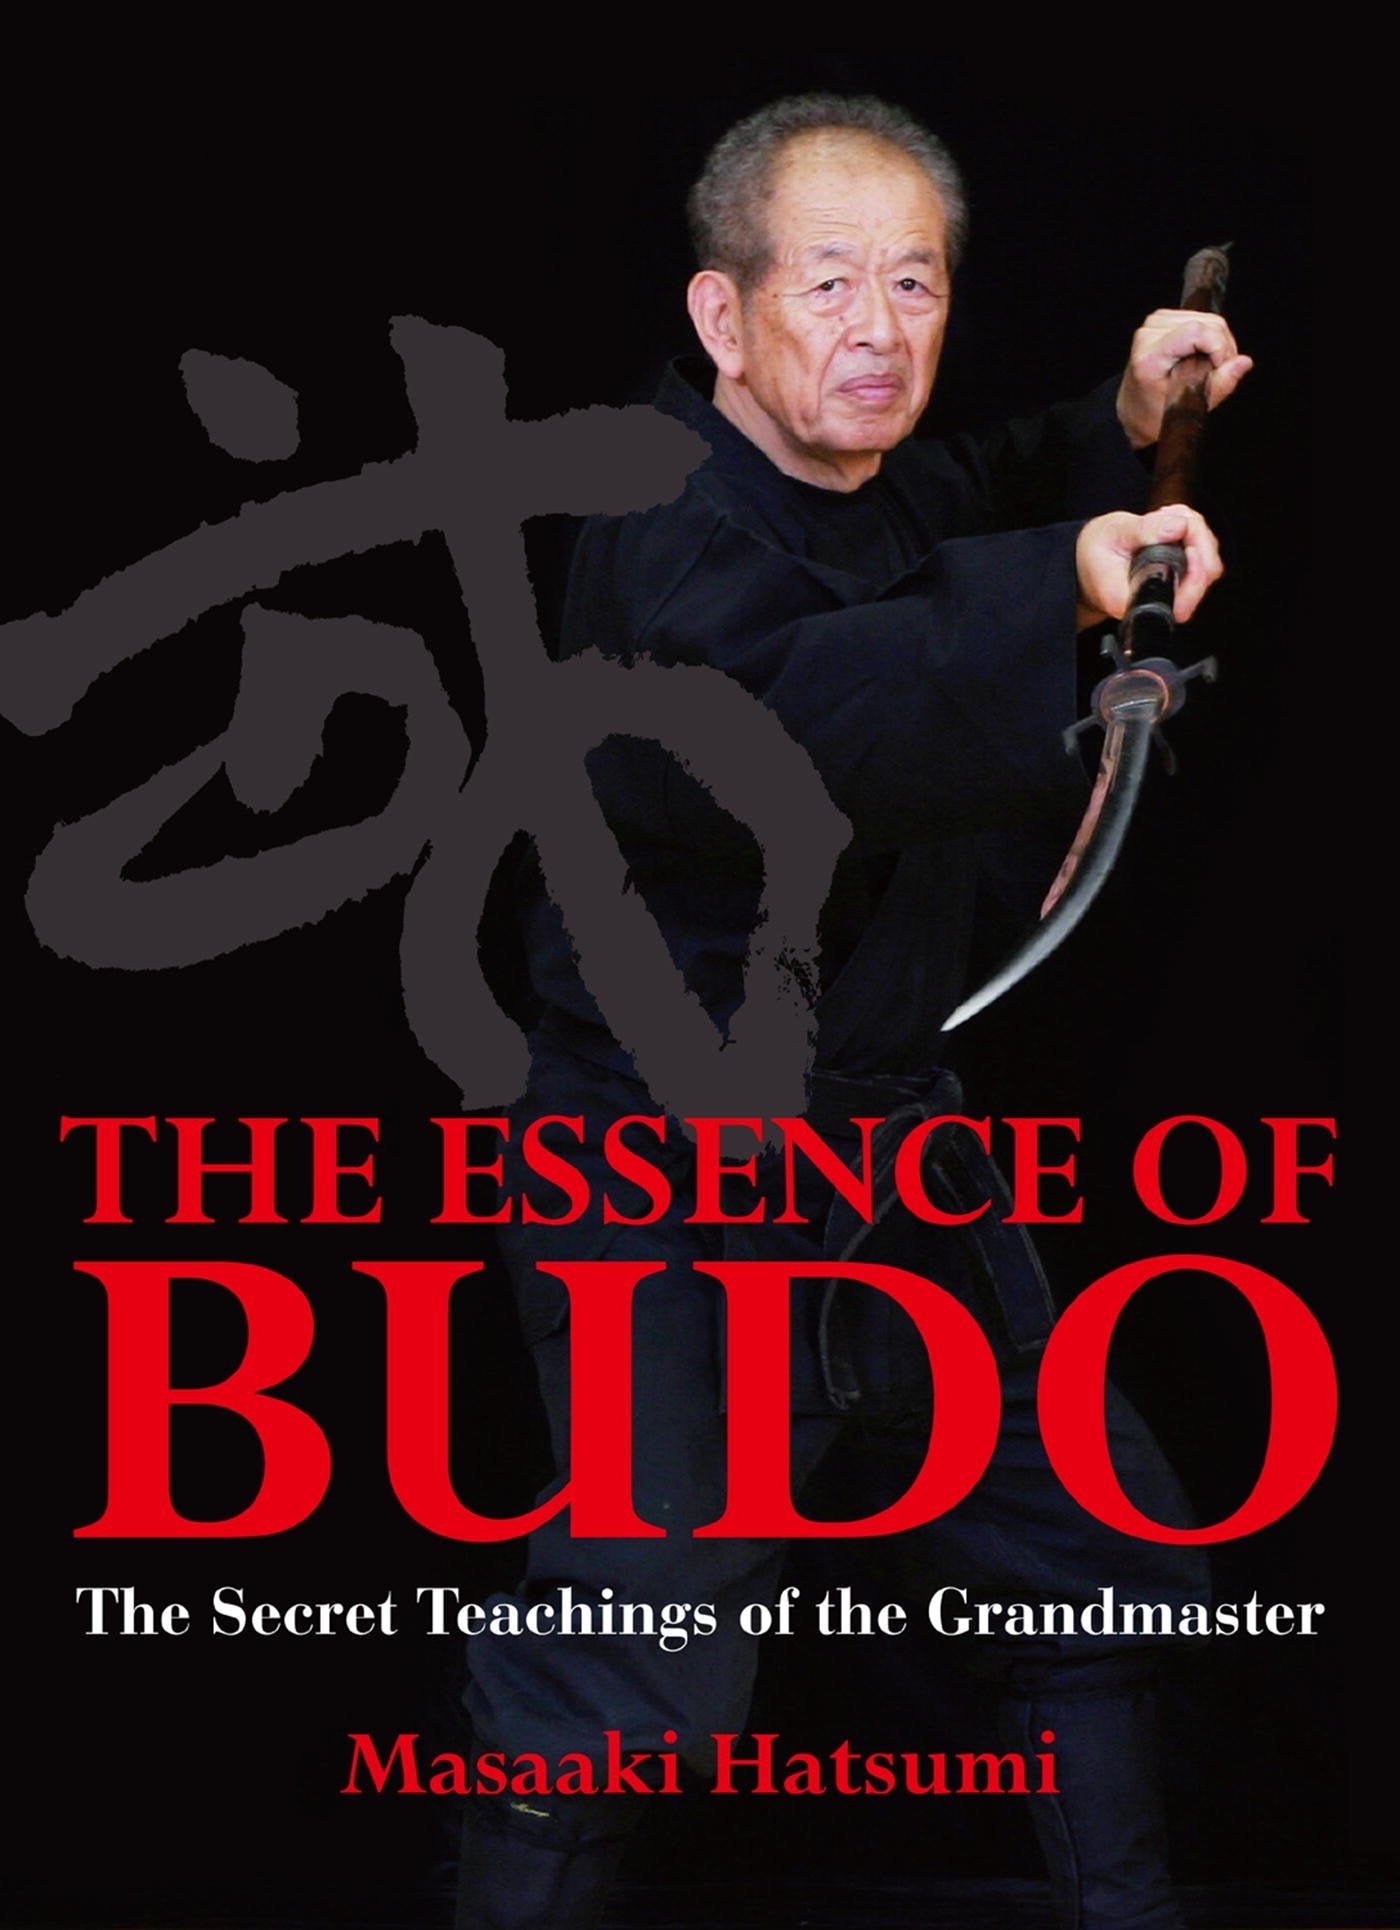 The Essence of Budo: The Secret Teachings of the Grandmaster Book by Masaaki Hatsumi - Budovideos